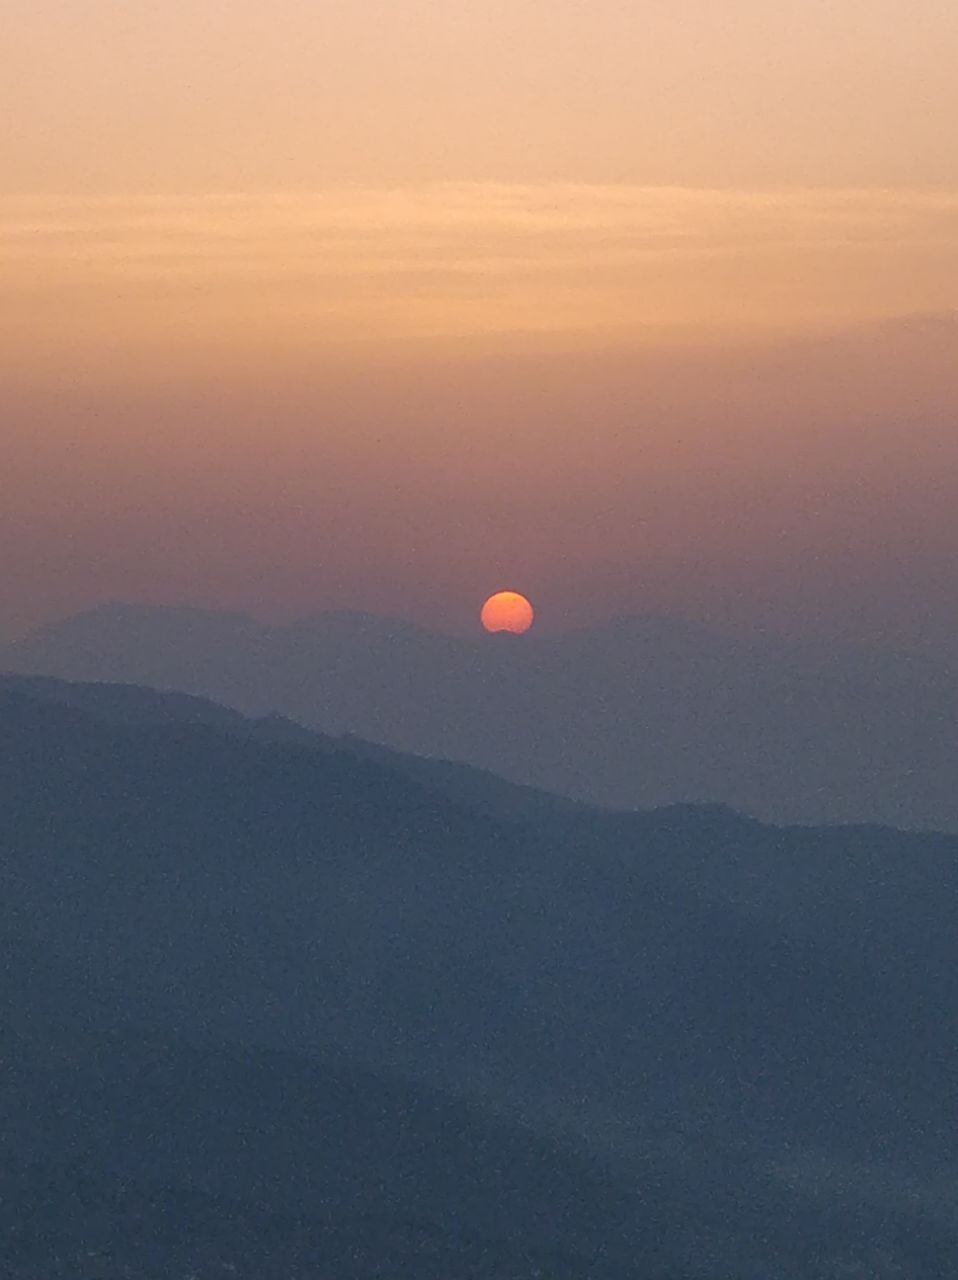 We witnessed the most stunning sunset at Chauli ki Jali behind the Mukteshwar Temple cliff.